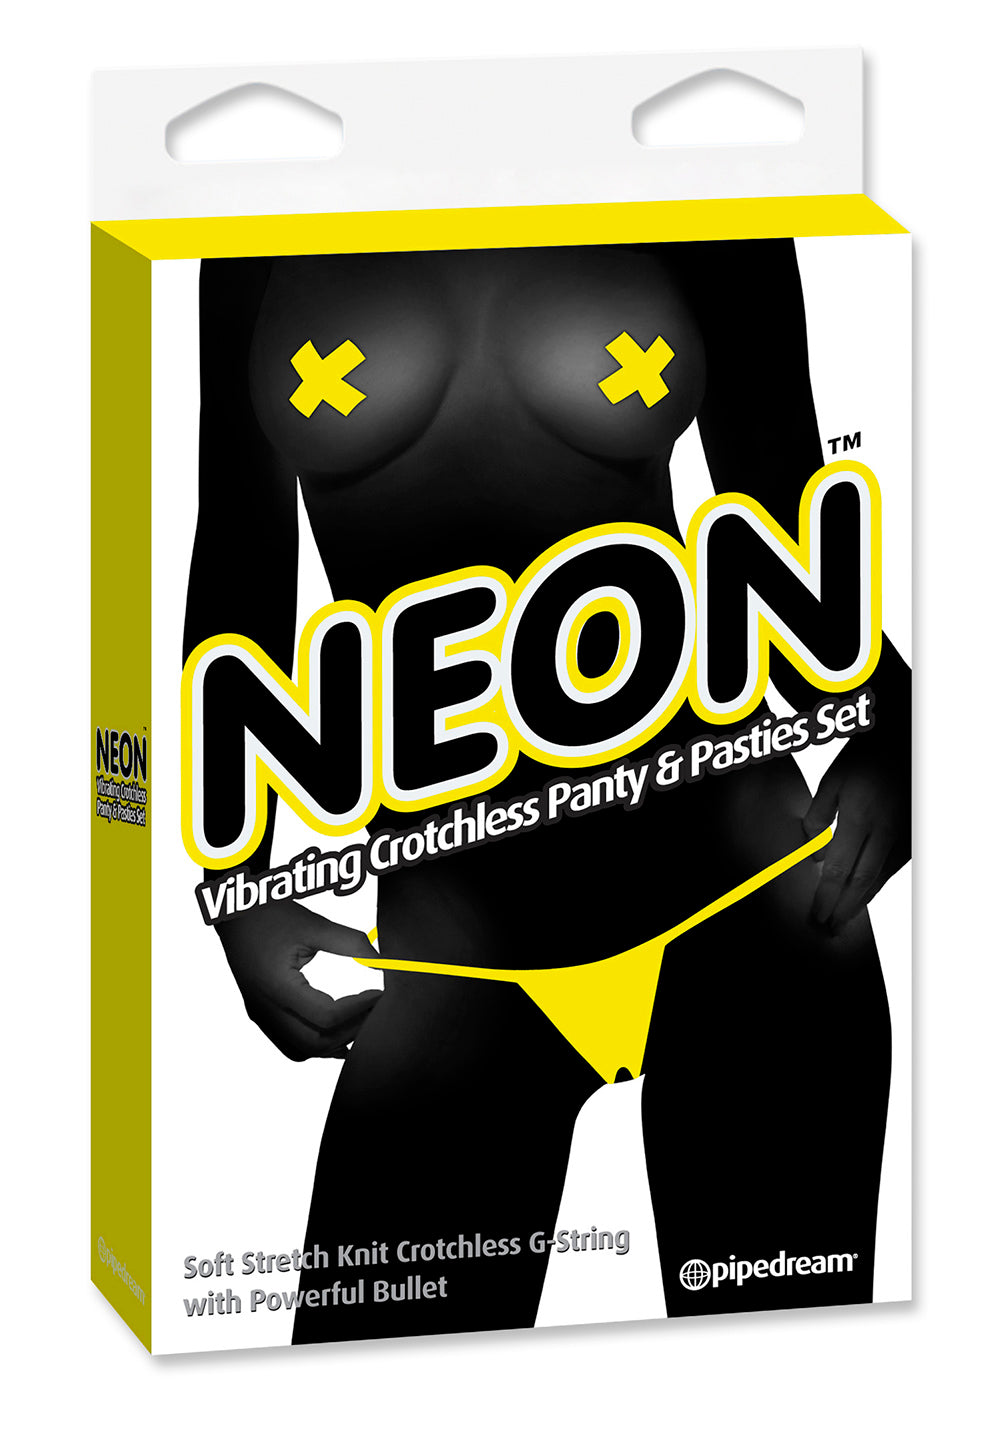 Neon Vibrating Crotchless Panty and Pasties Set Yellow